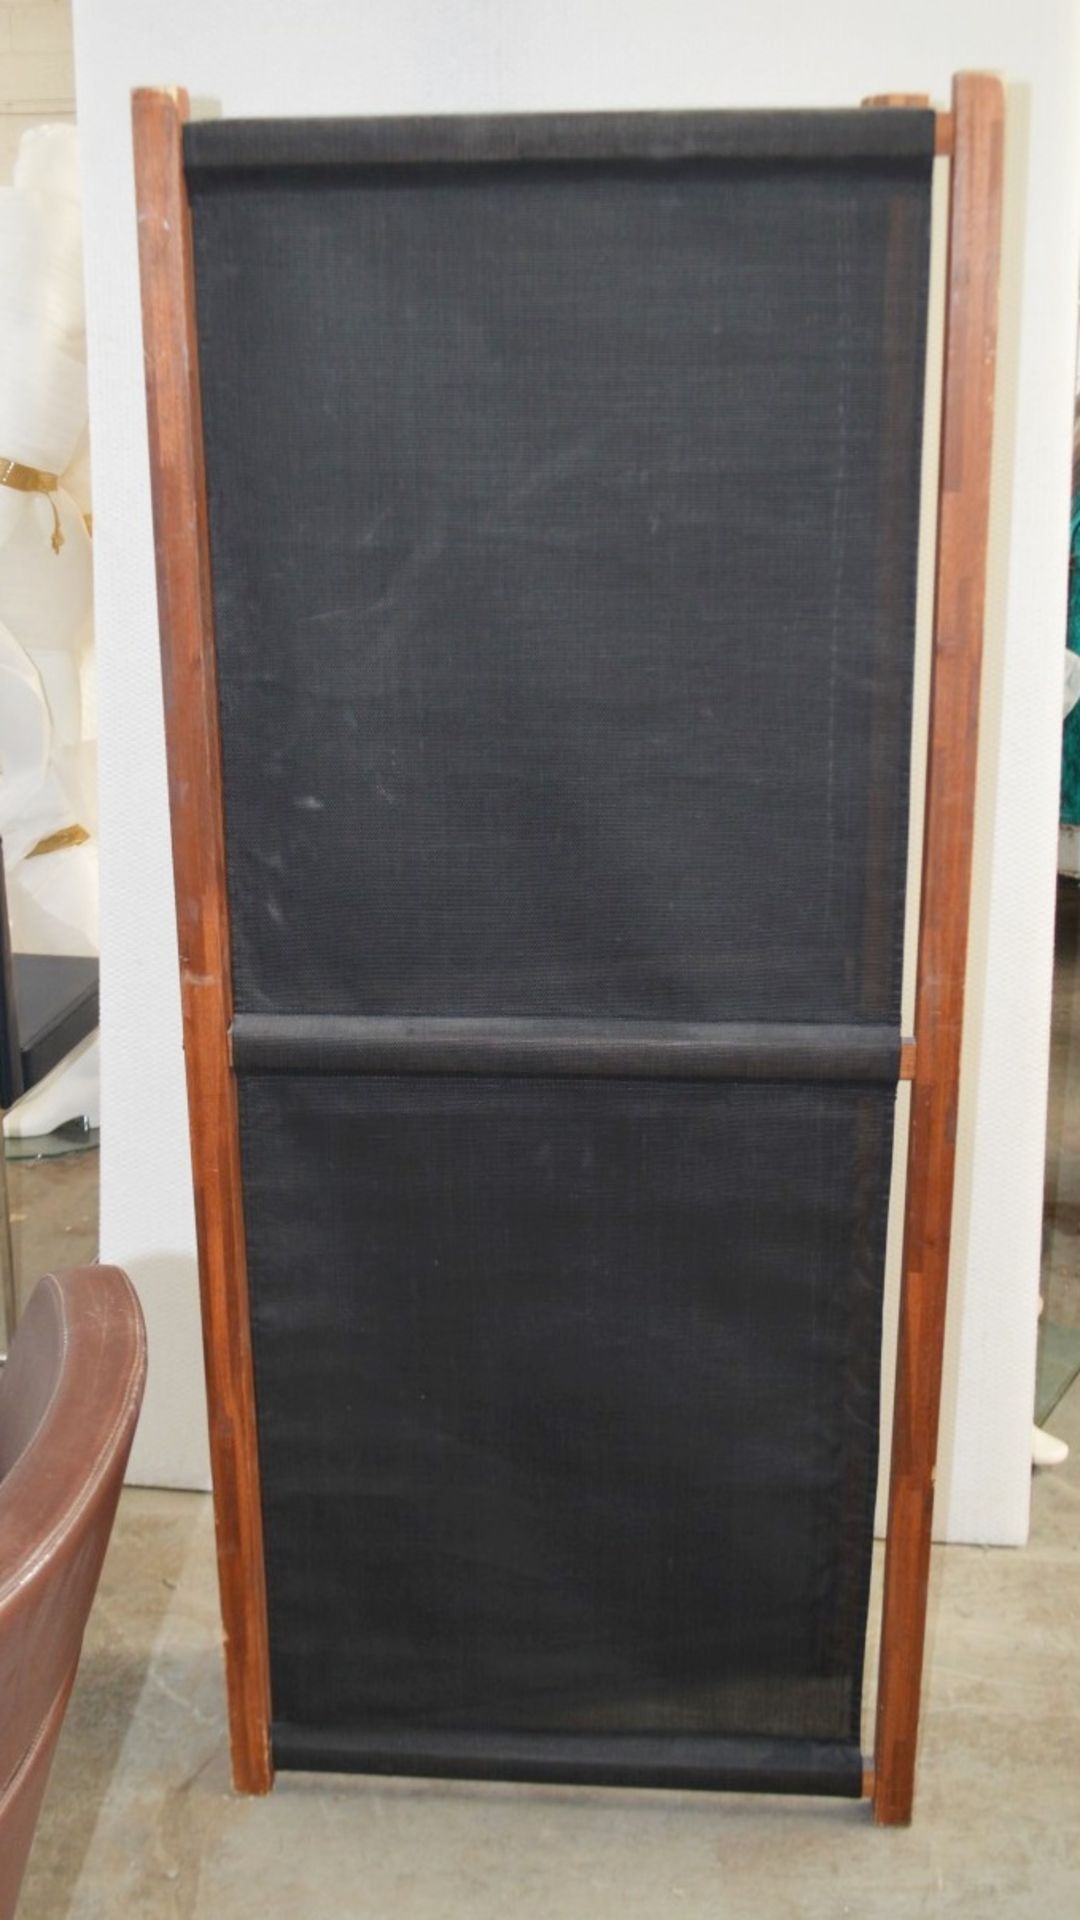 1 x 3-Panel Dressing Screen / Divider  - Dimensions (approx): H180 x W135cm - Ref: MHB115 - Image 4 of 4